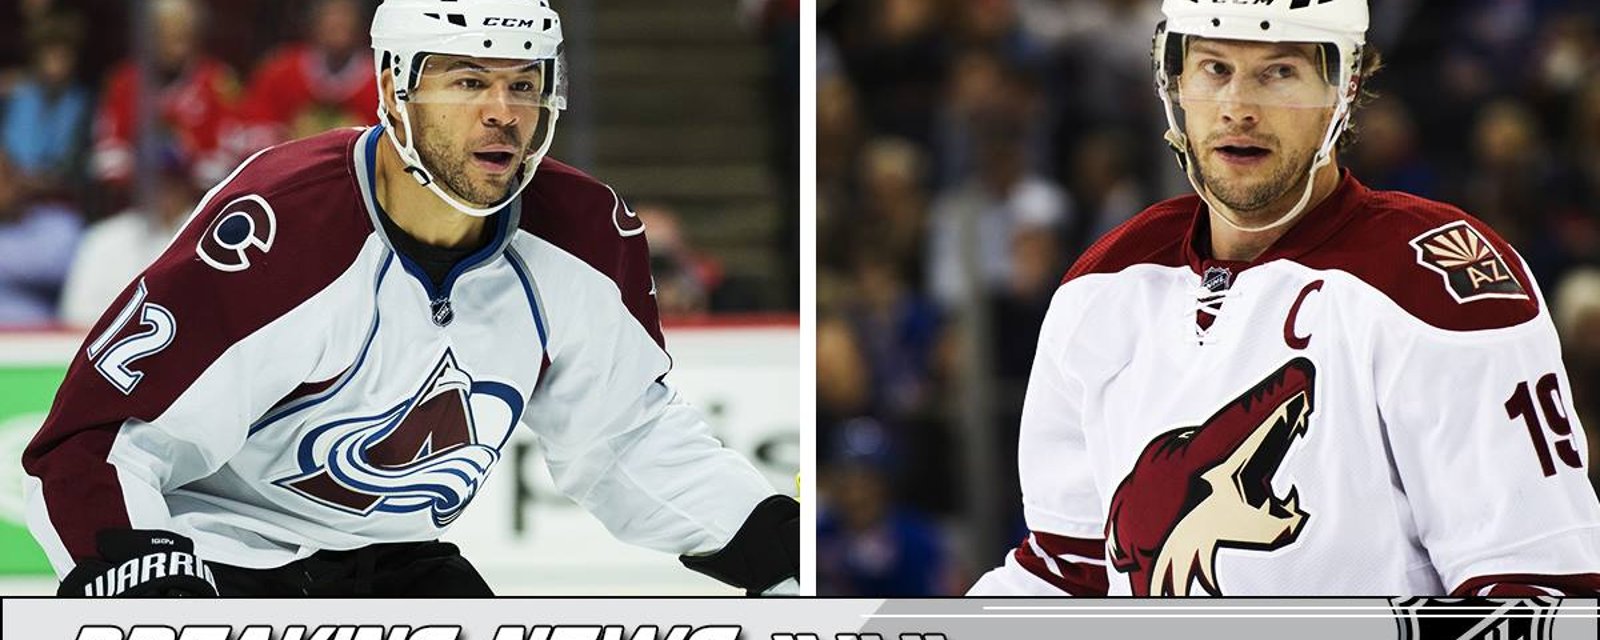 This could be the final clash between two great NHL veterans.